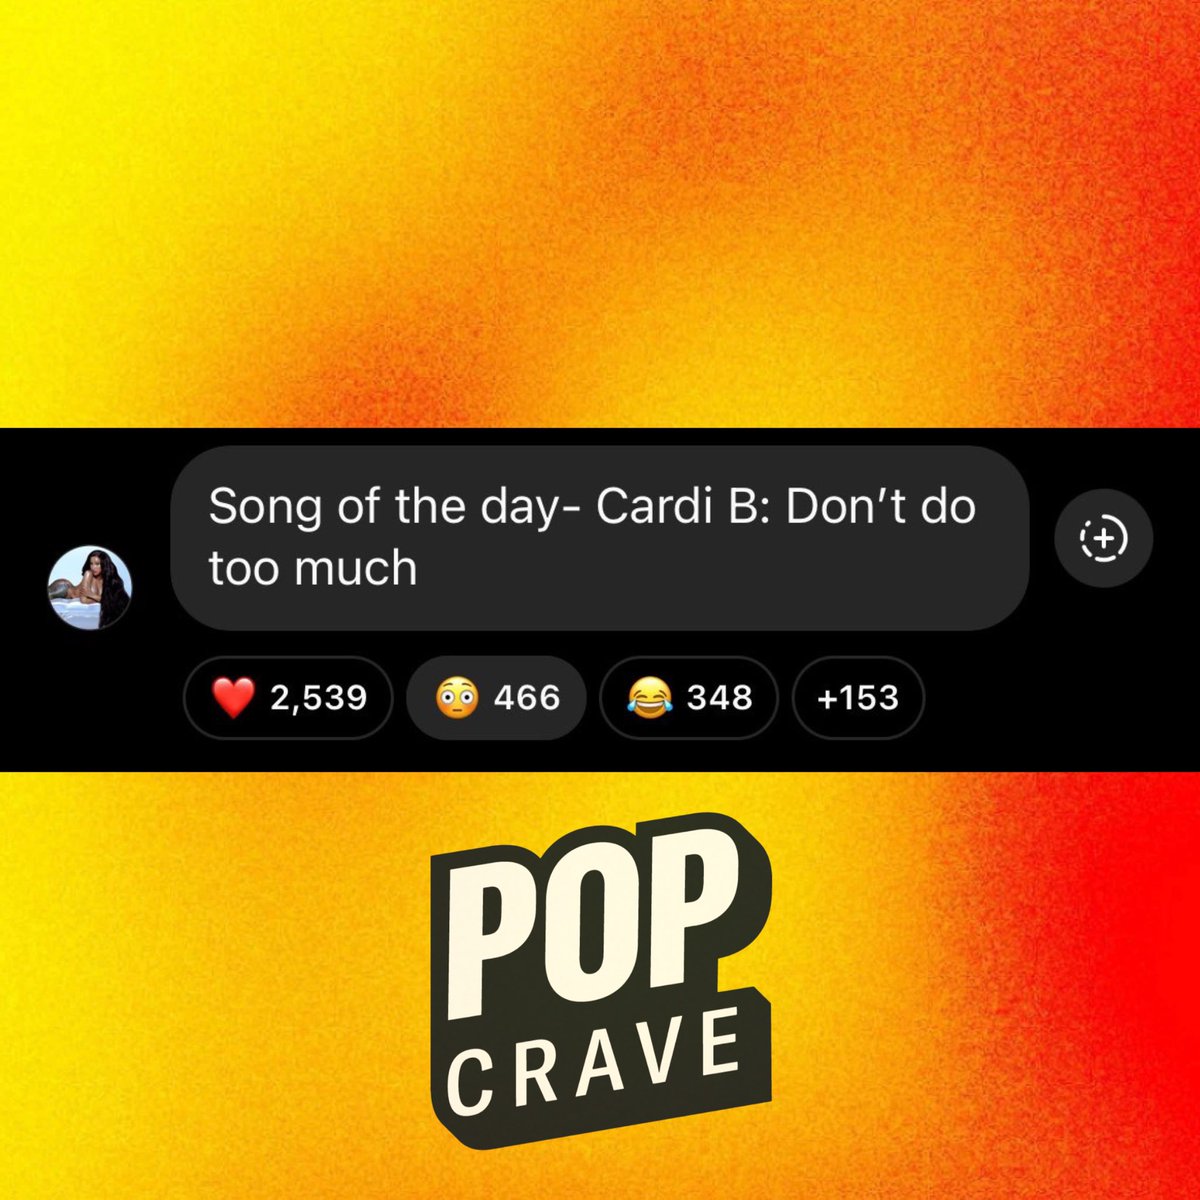 Cardi B reveals new song title, “Don’t Do Too Much” in song of the day segment.